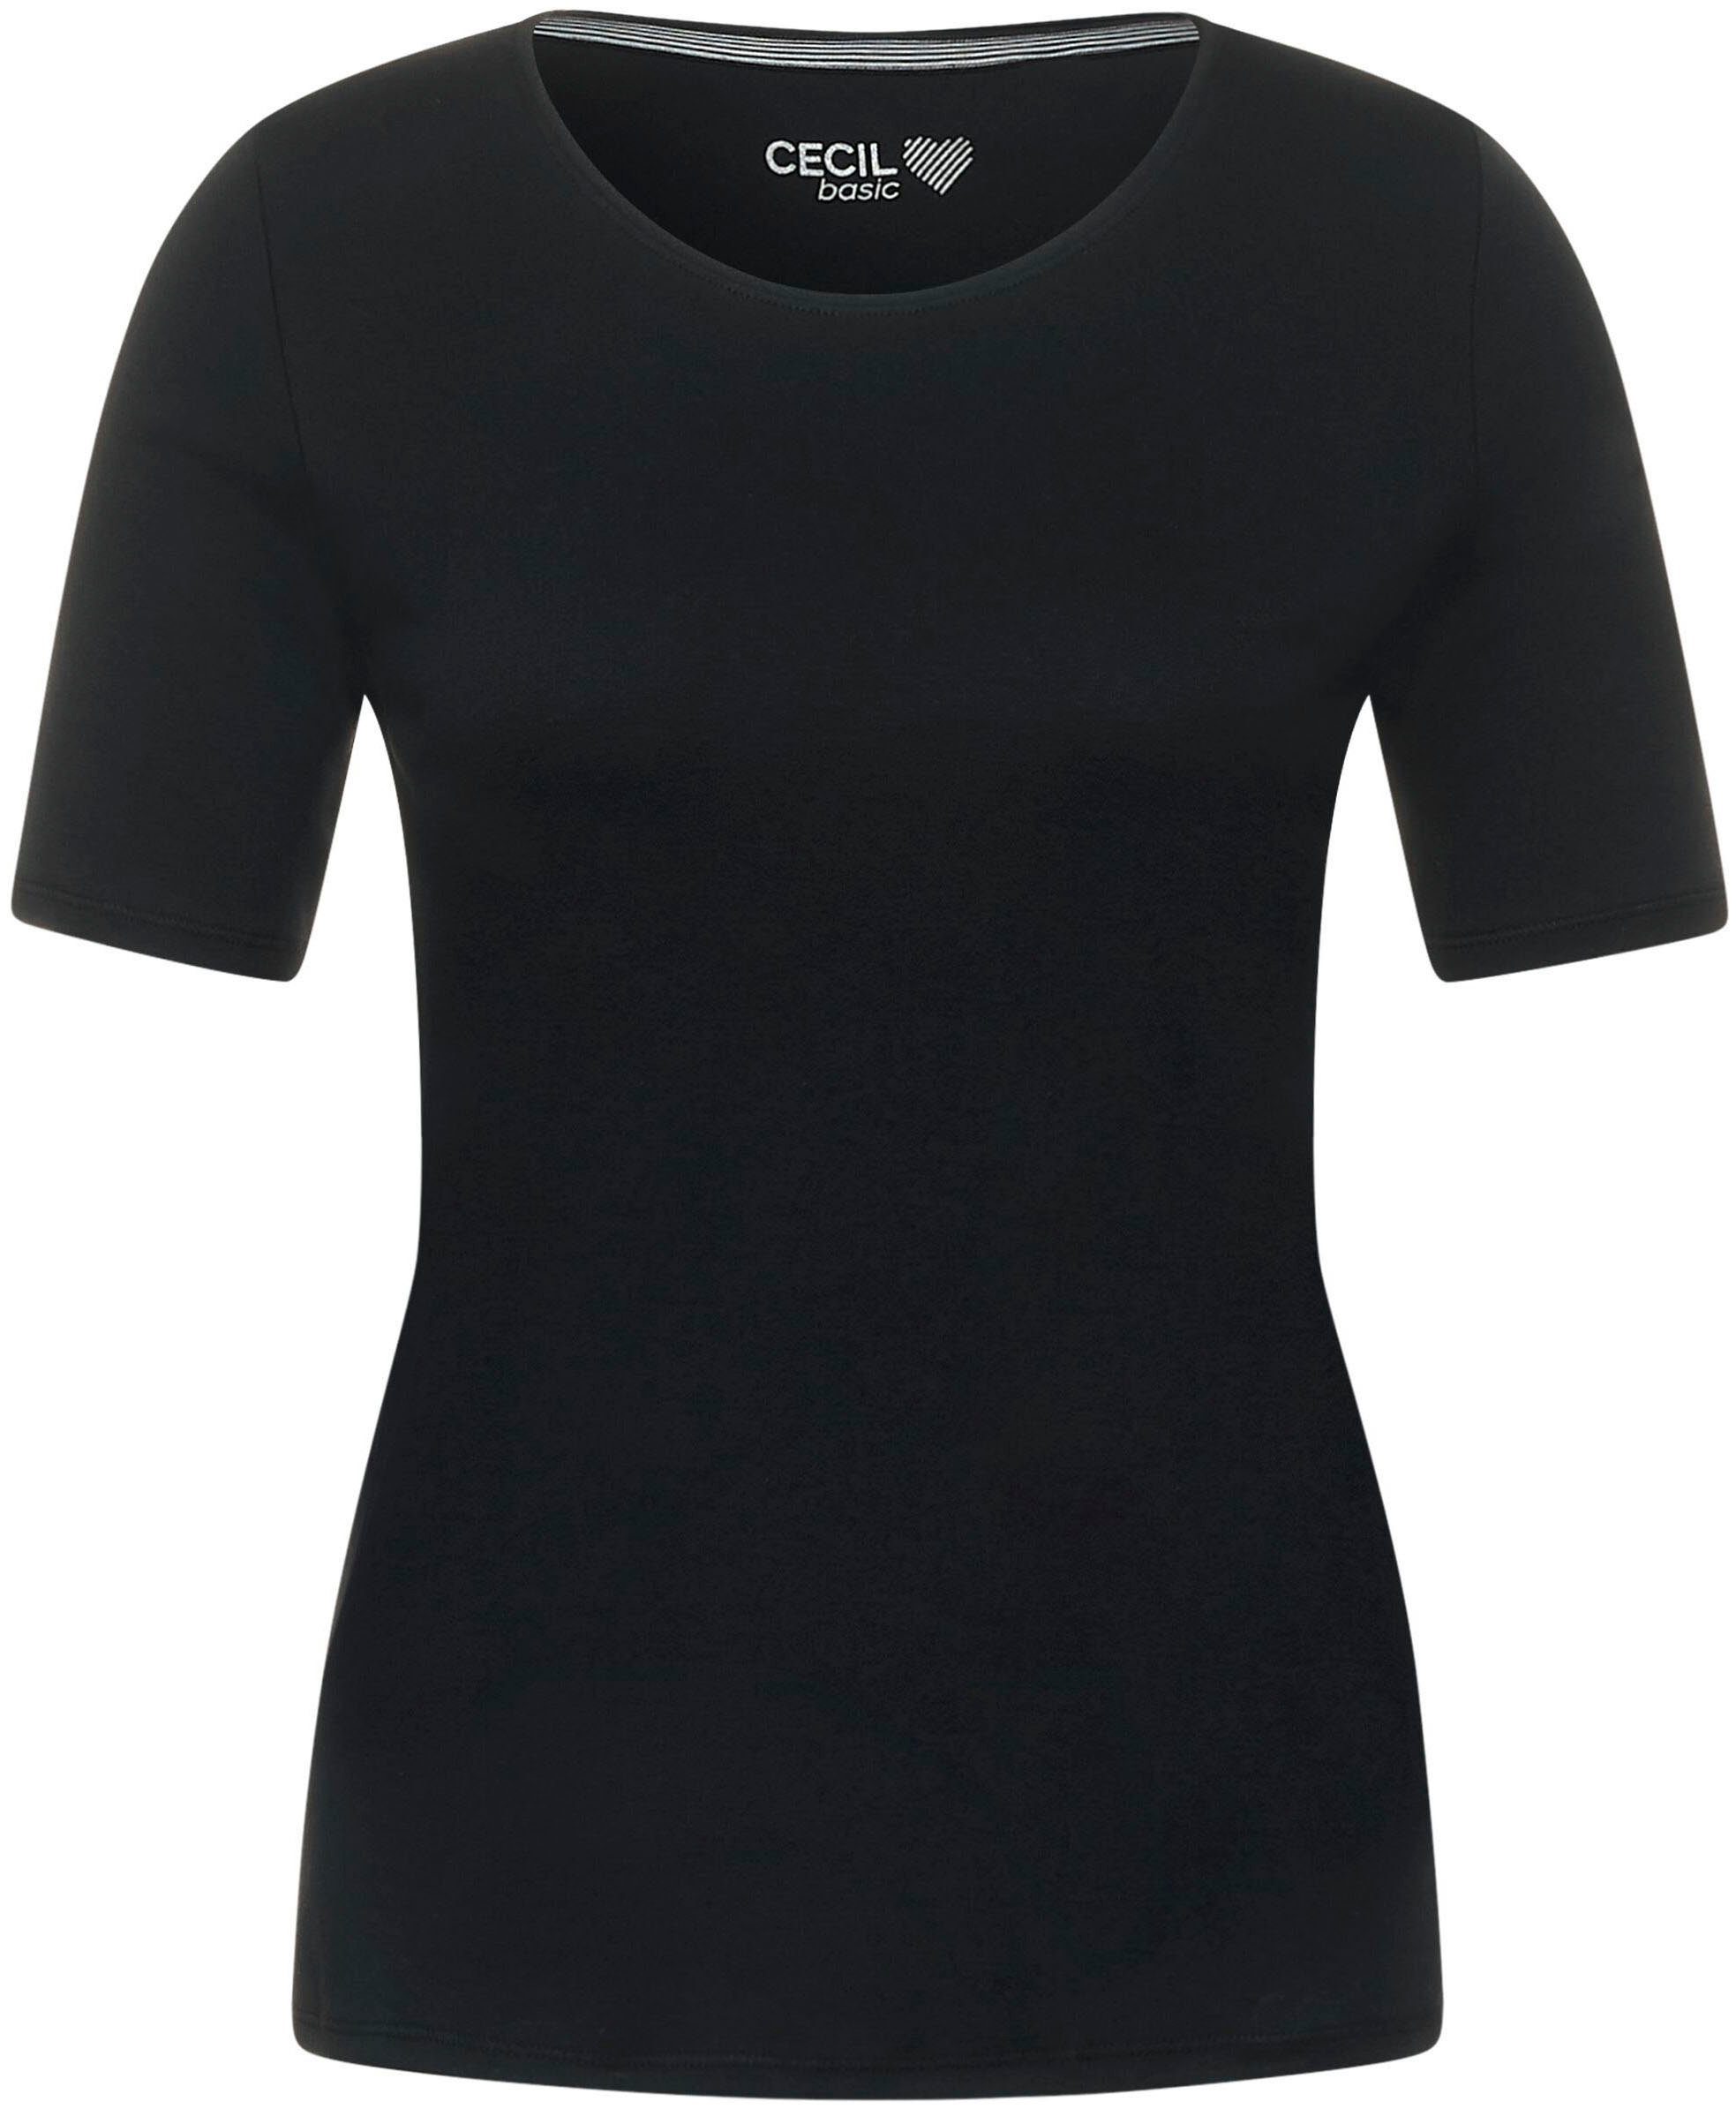 Black Unifarbe Style in Cecil Lena T-Shirt